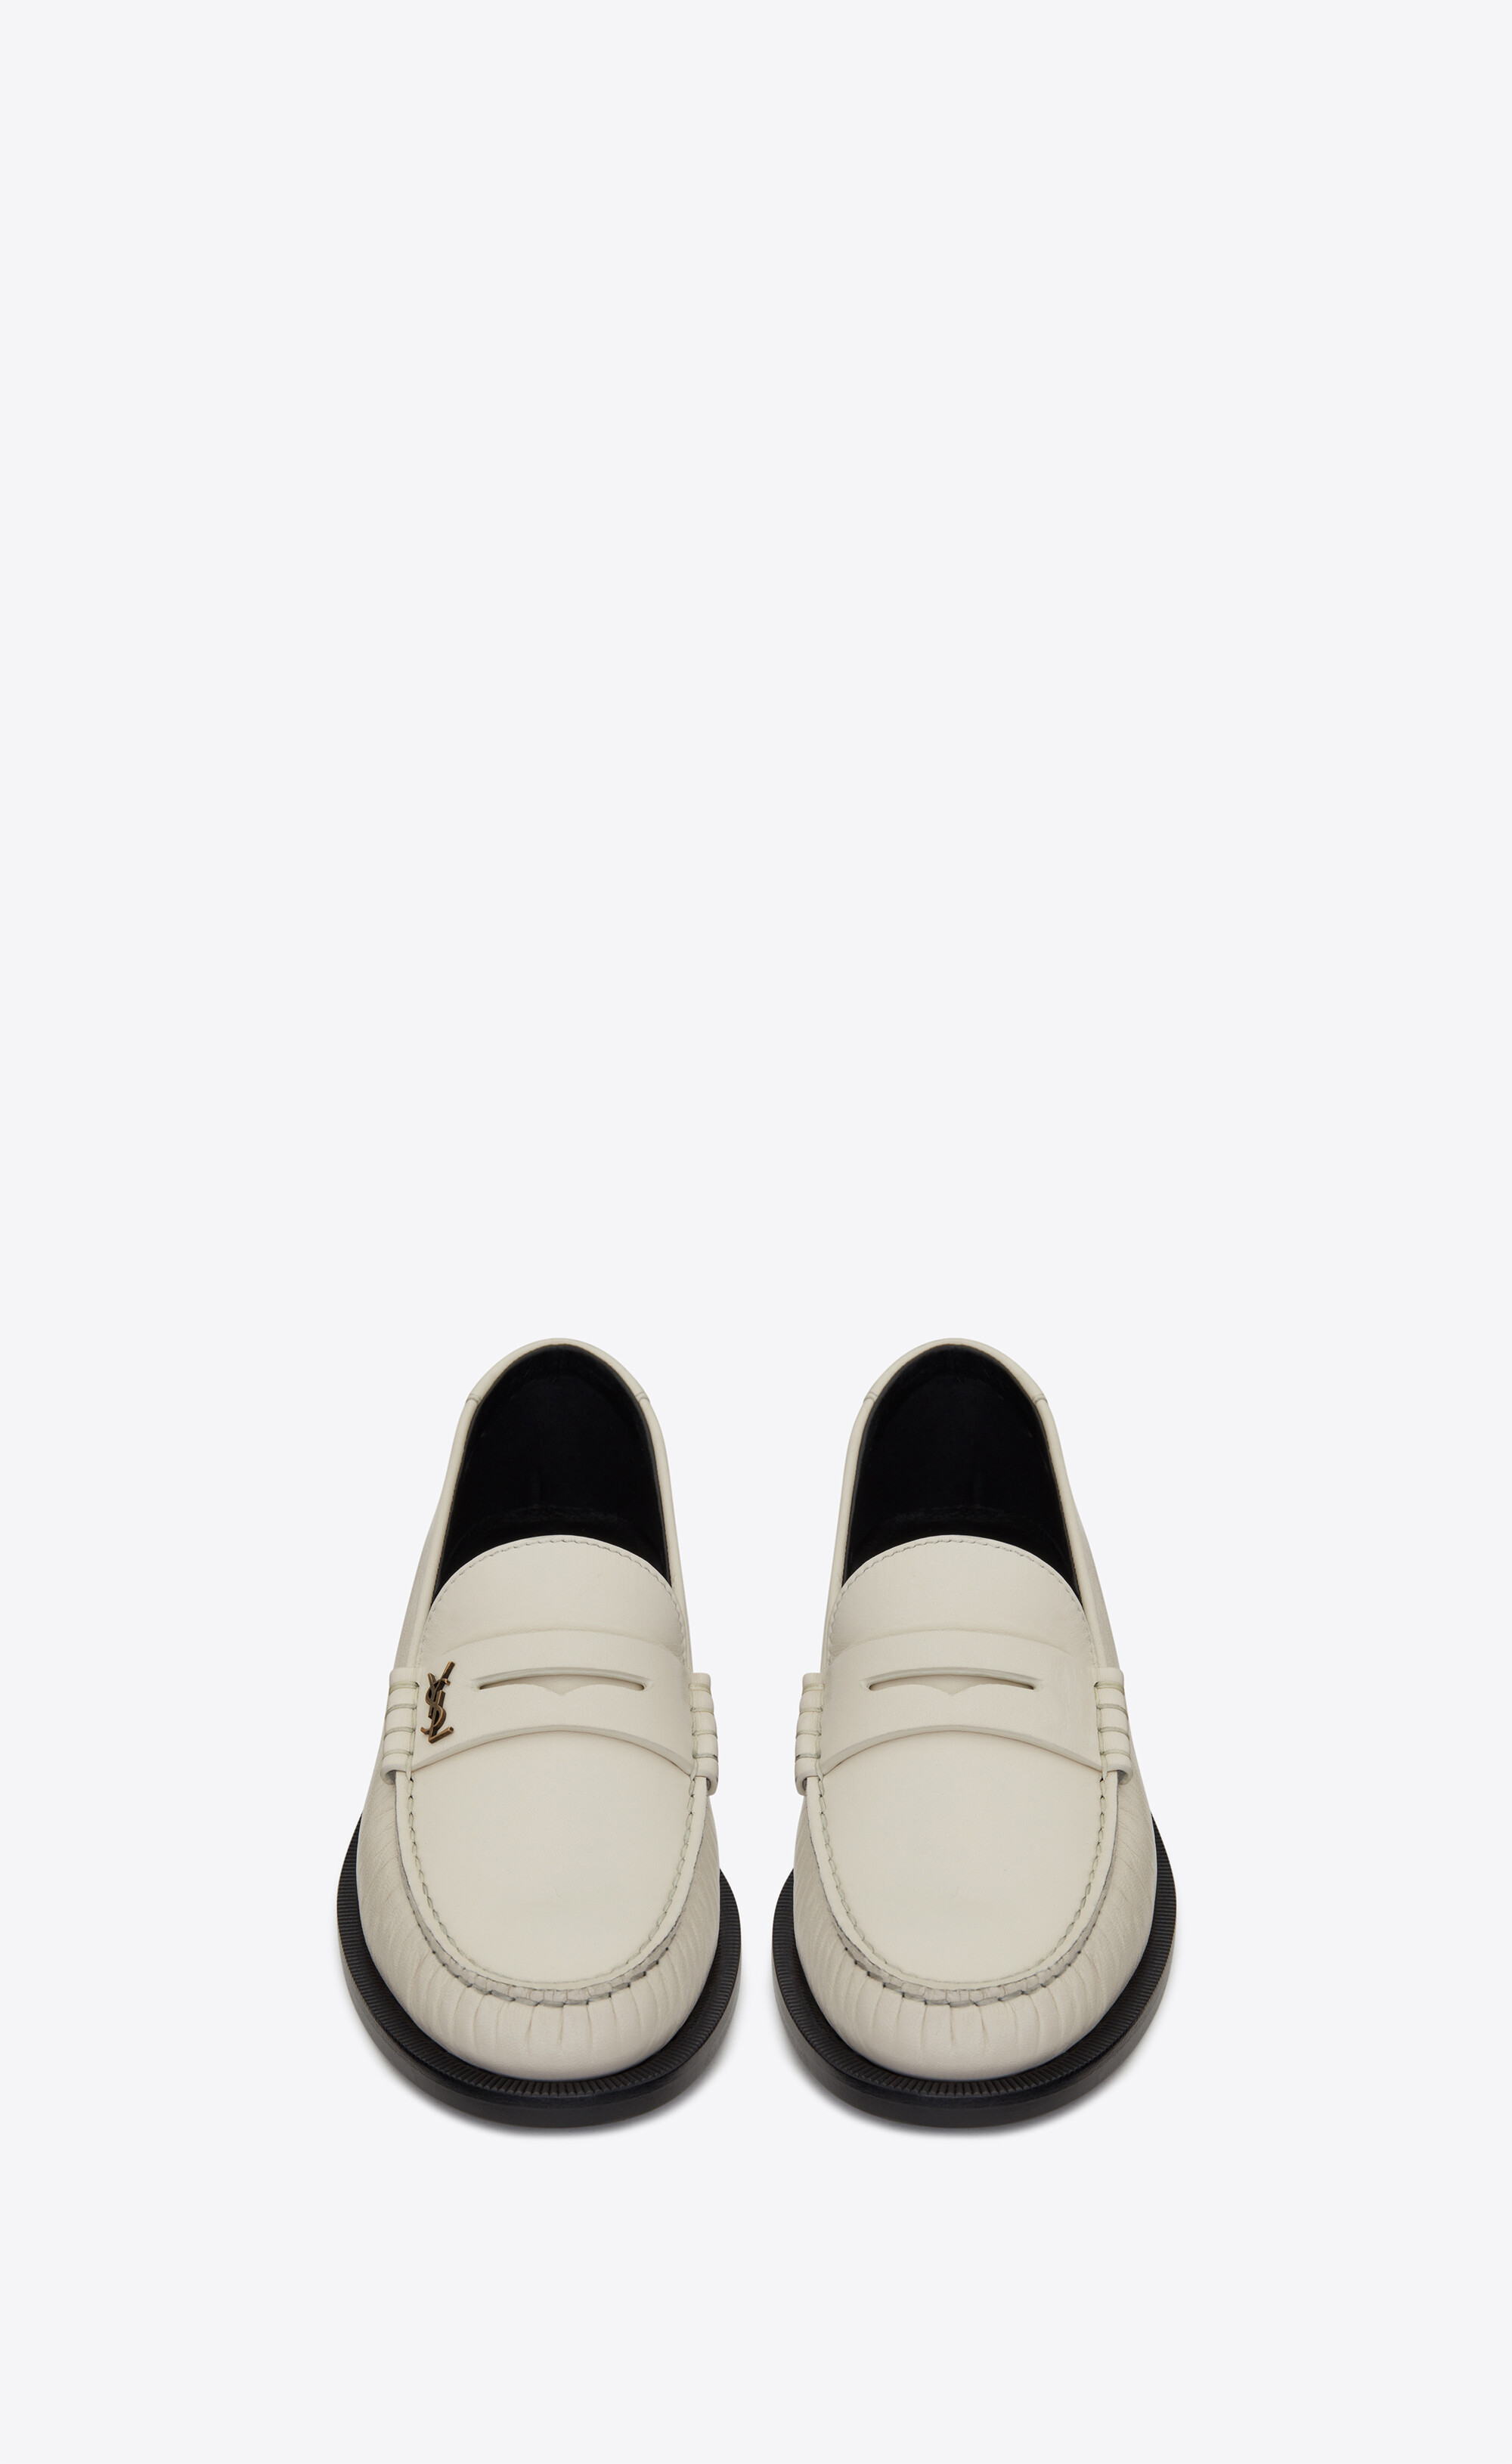 LE LOAFER penny slippers IN SMOOTH LEATHER | Saint Laurent | YSL.com